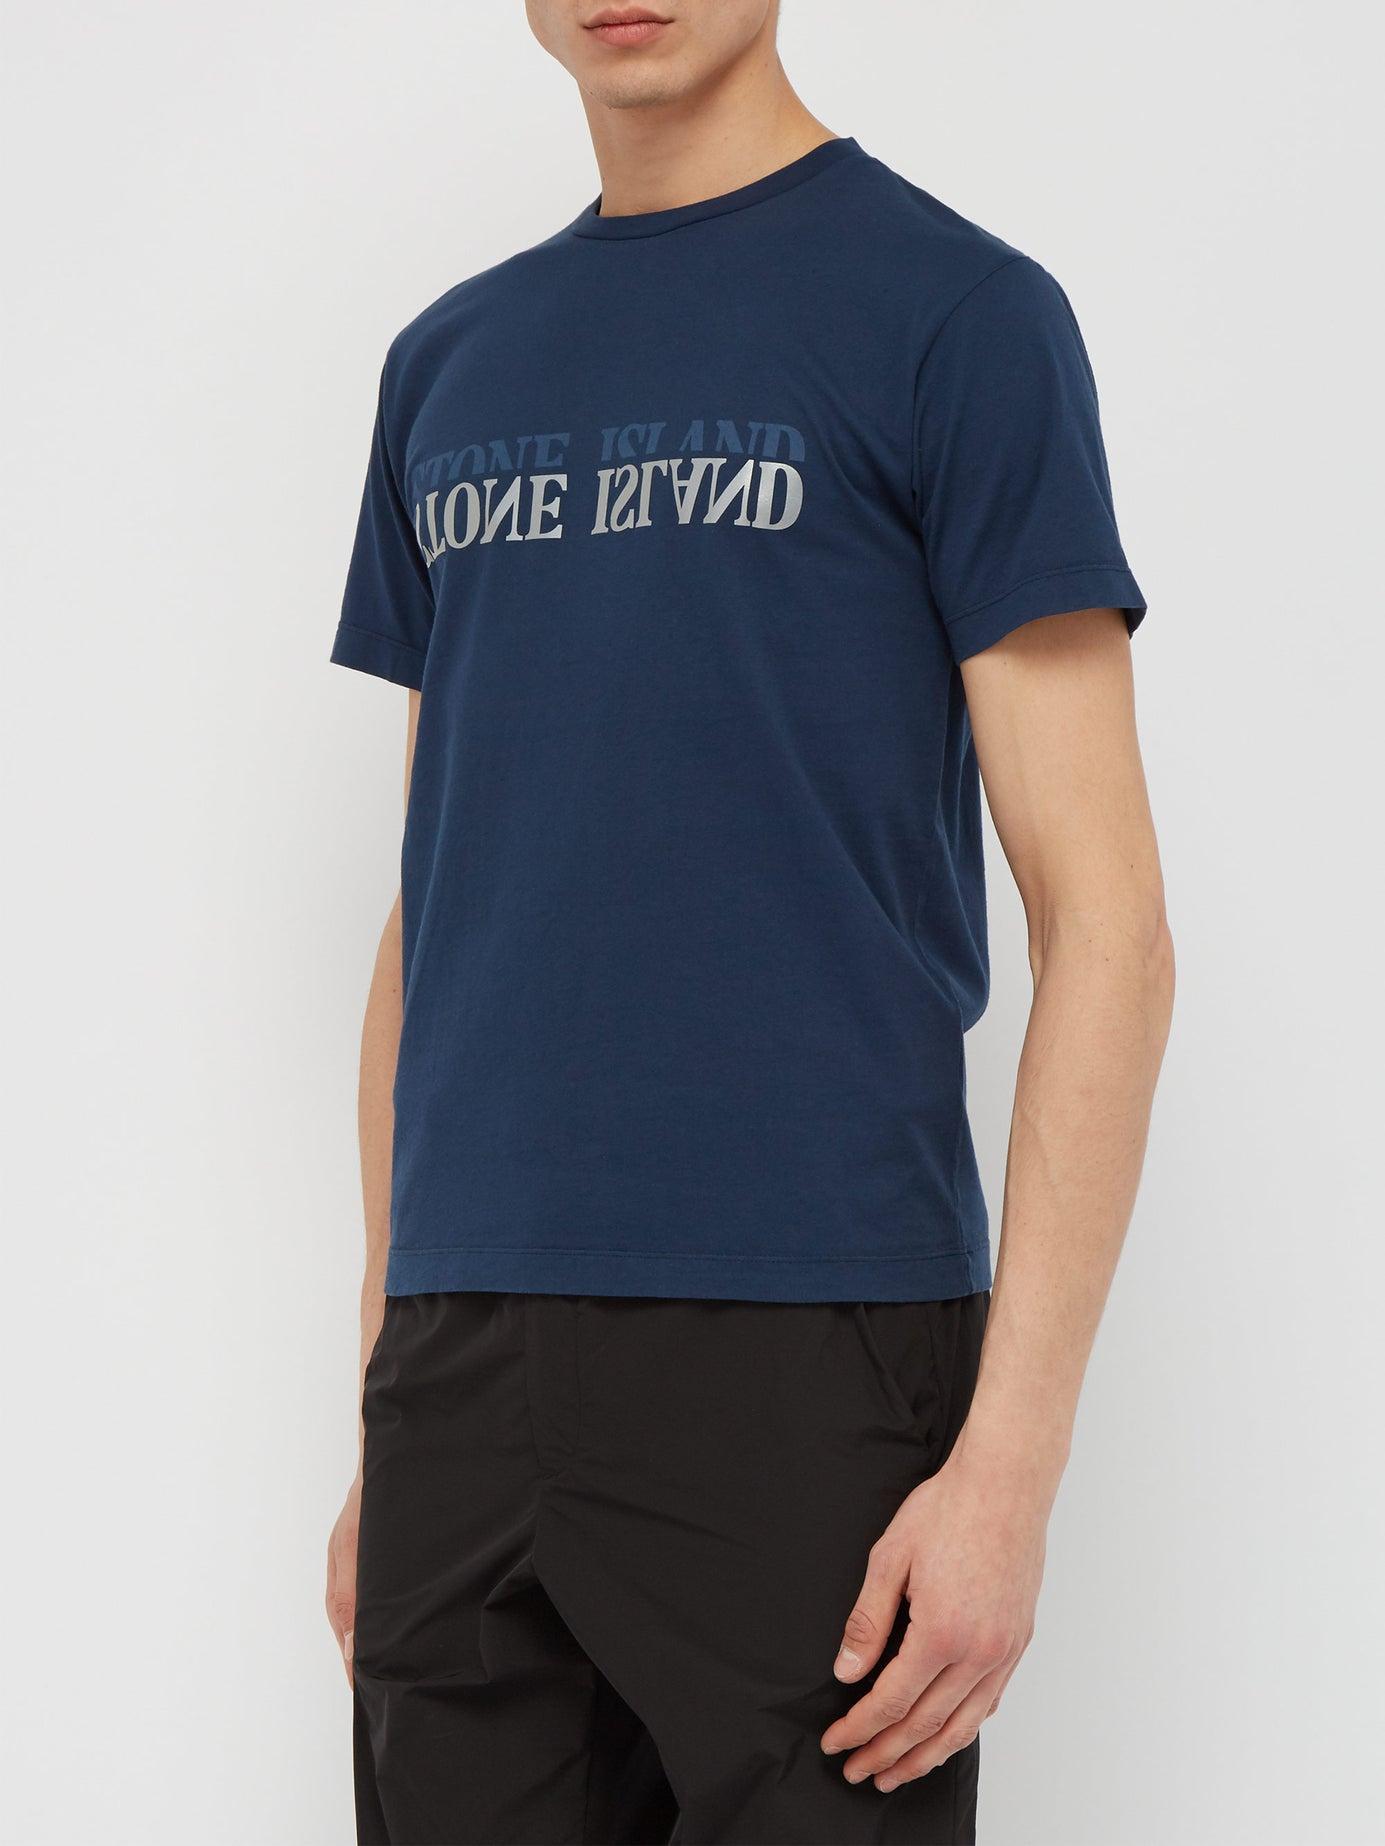 Stone Island Reflective Mirror-logo Print Cotton-jersey T-shirt in Navy  (Blue) for Men | Lyst